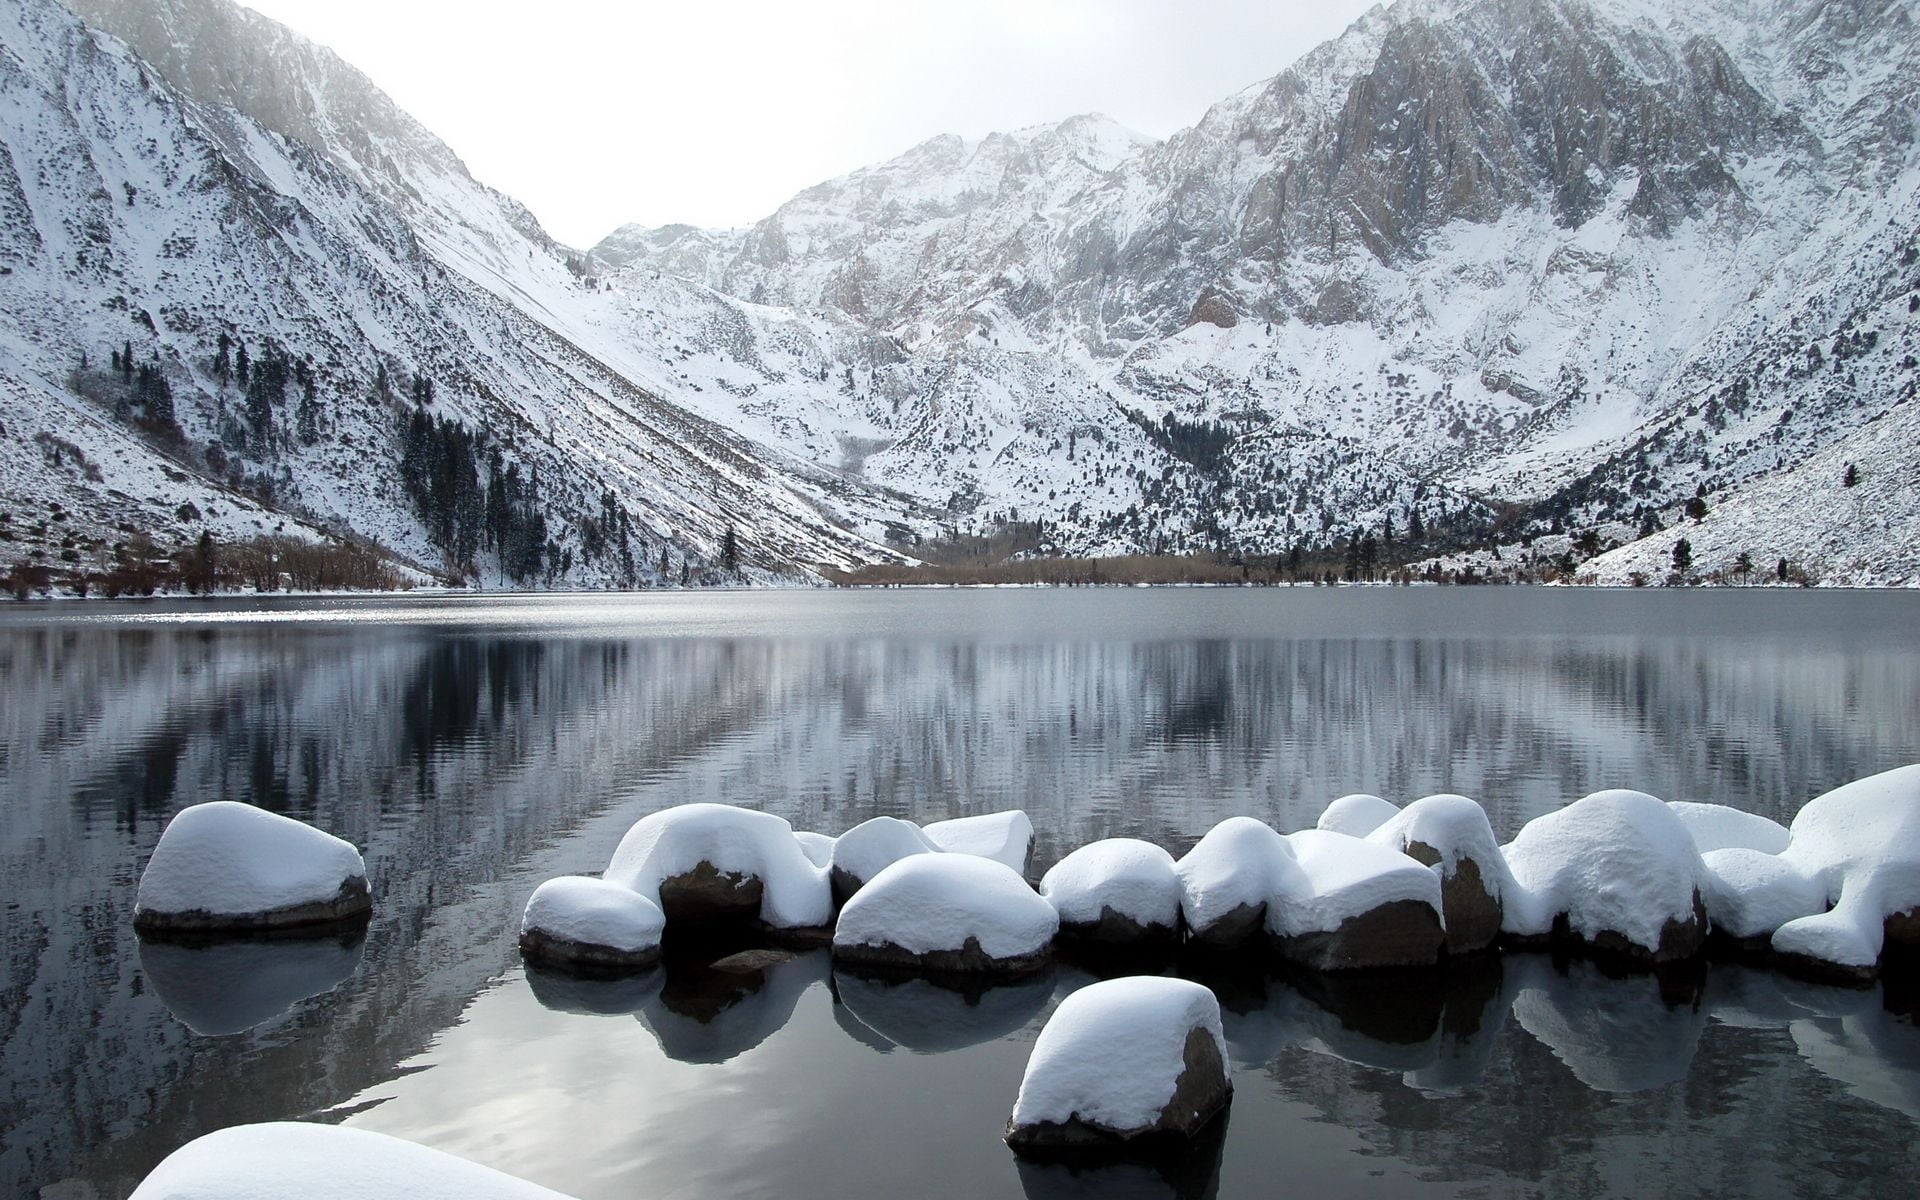 snow covered mountain and rocks surrounded by body of water